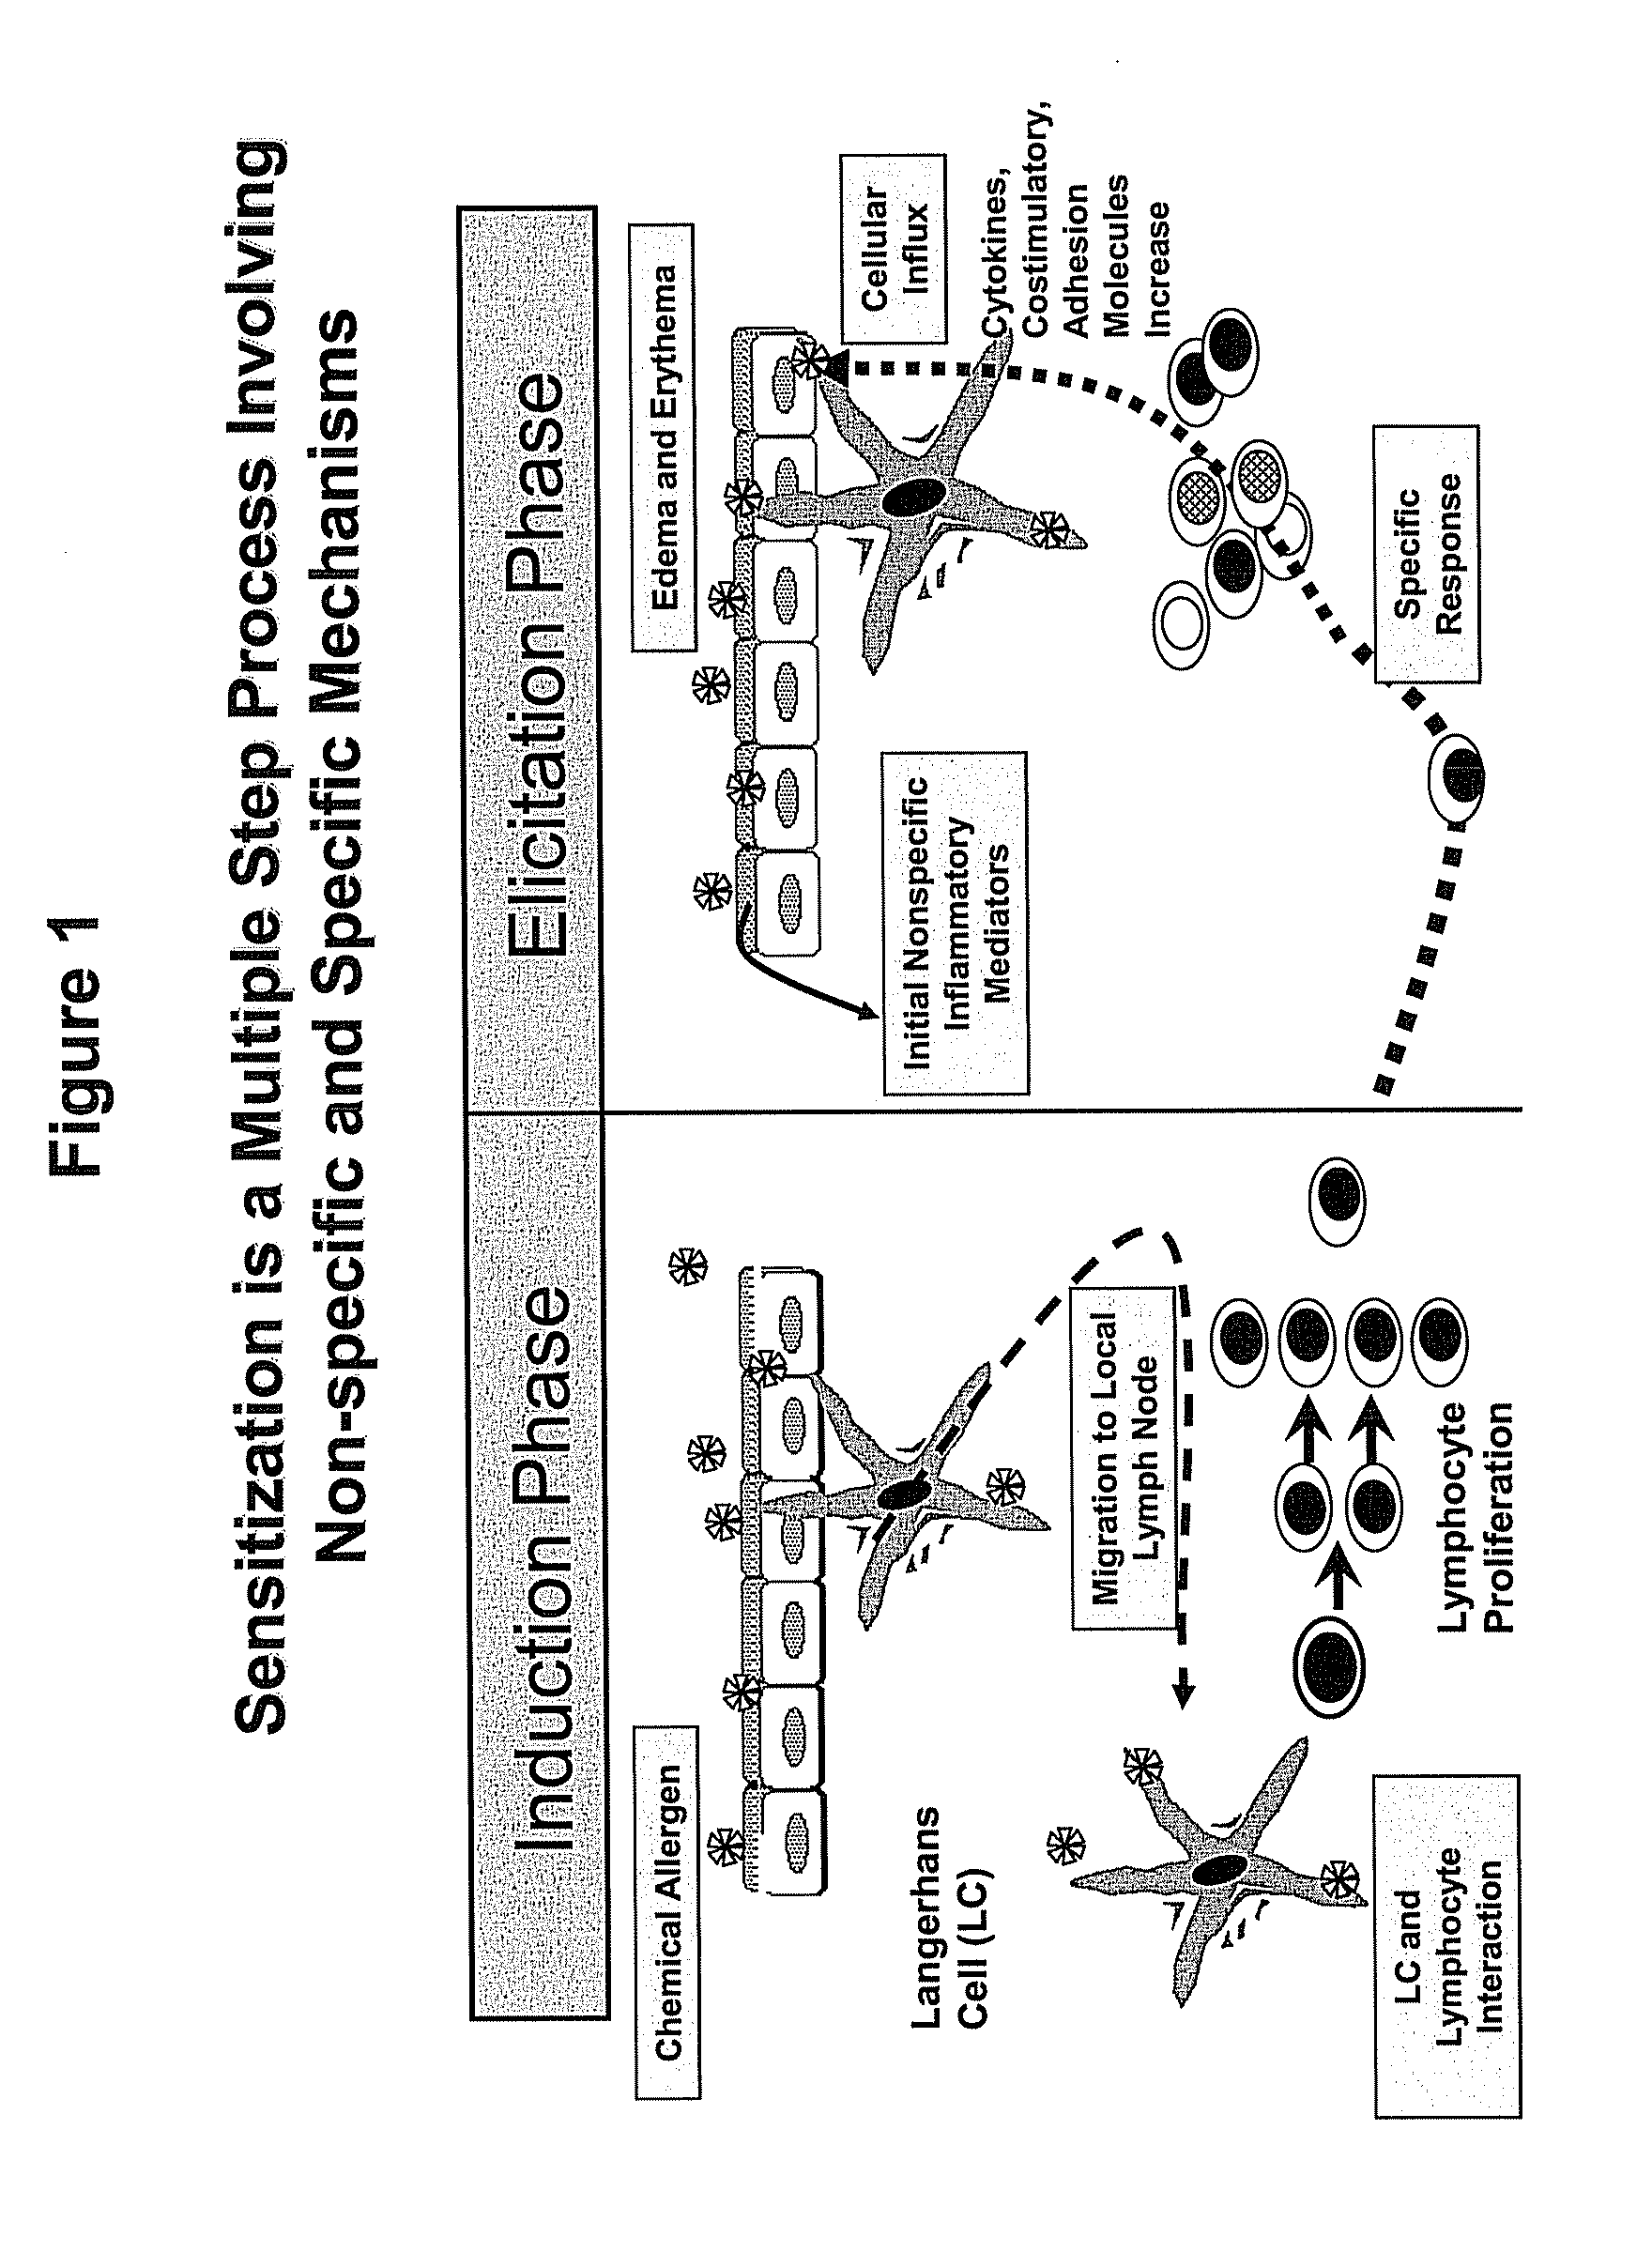 Method for Predicting Skin Sensitizing Activity of Compounds